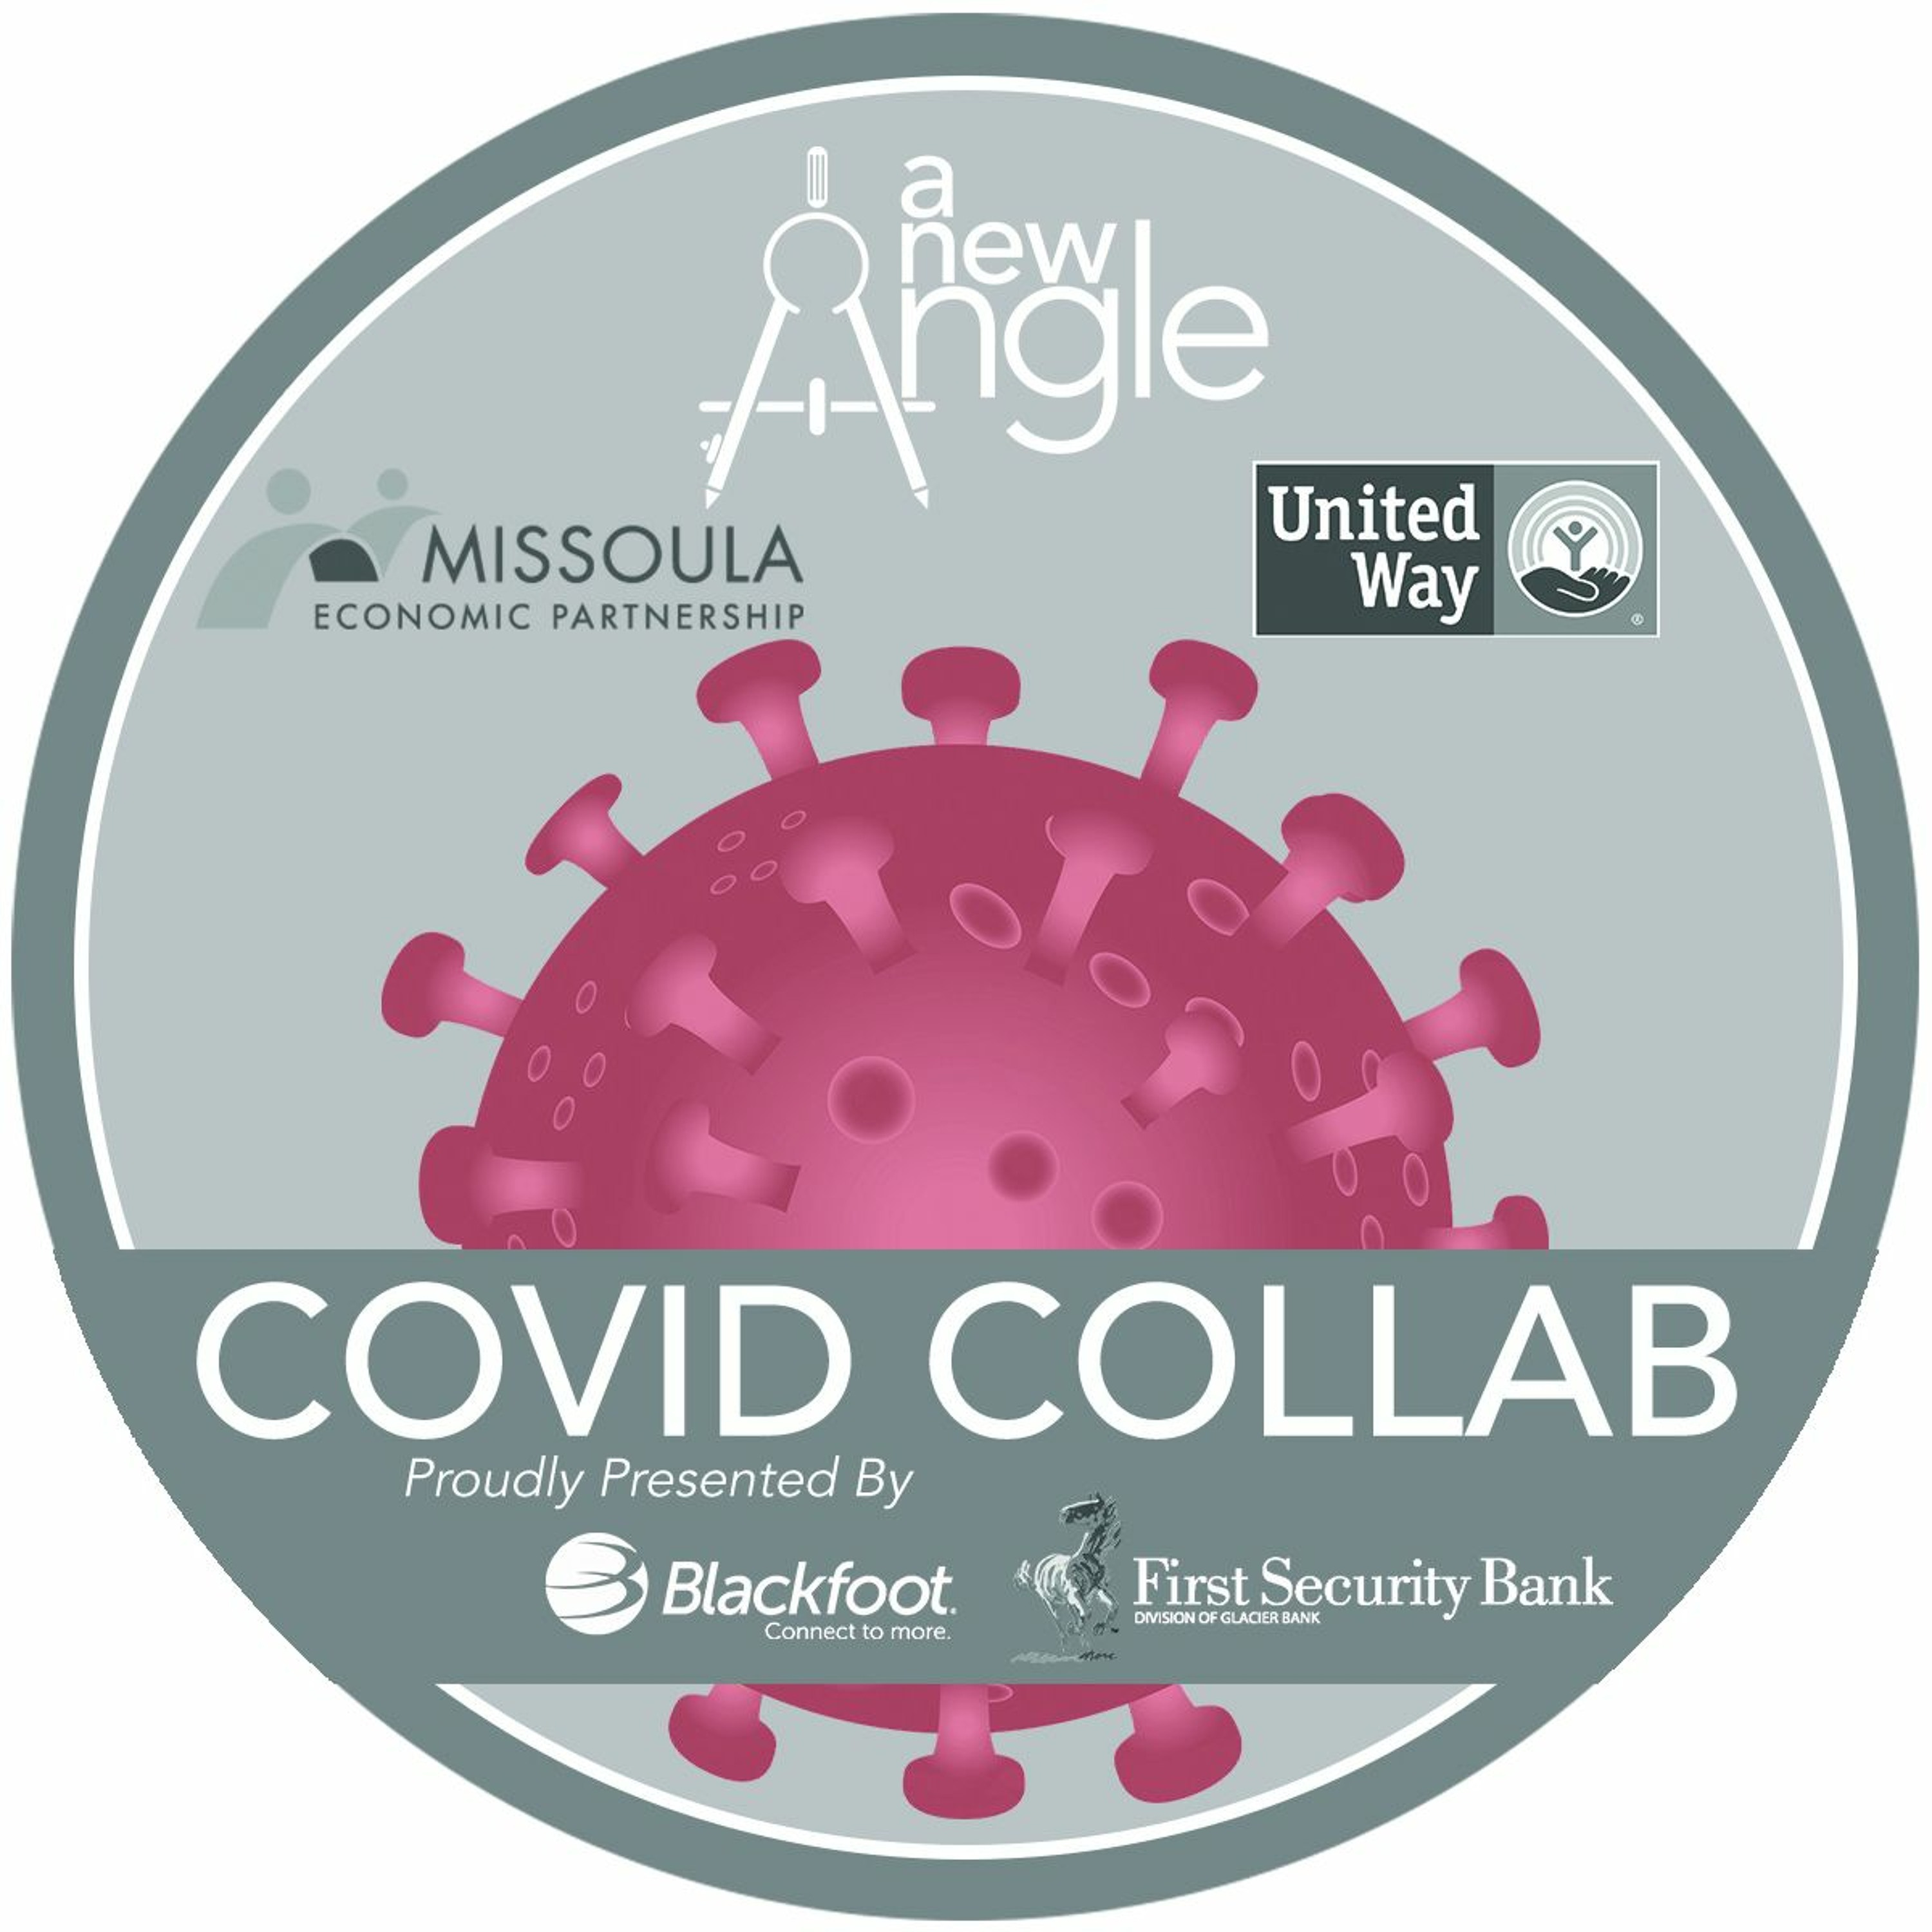 Covid Collab #3 with an update from Dr. Dan Pierce